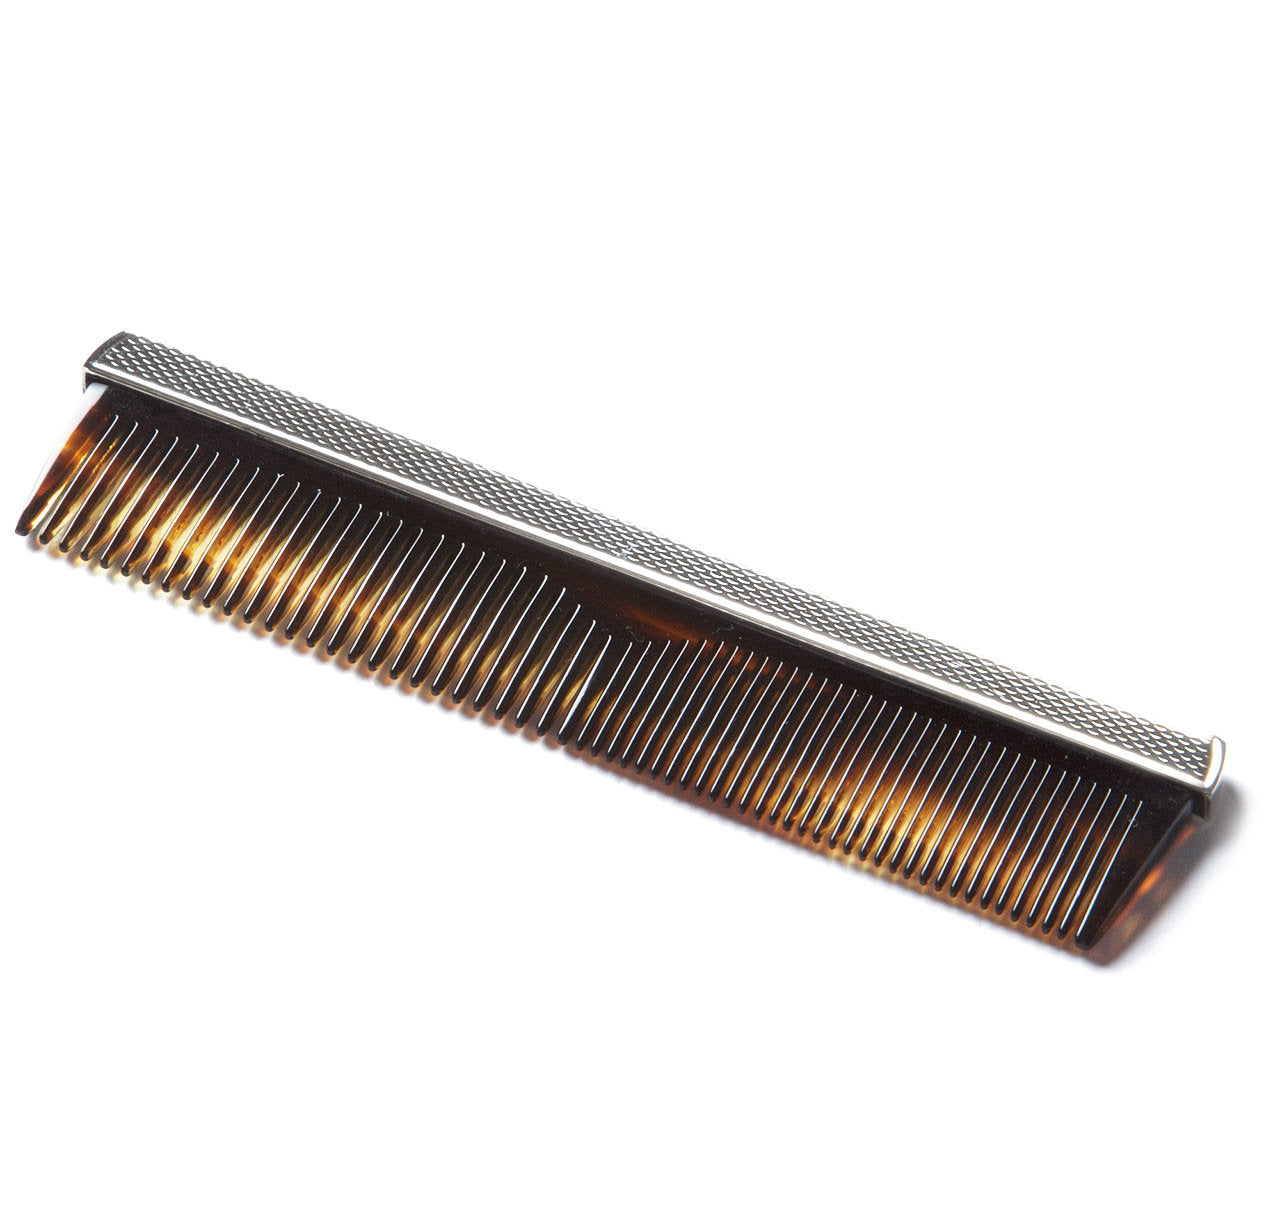 Sterling Engine-Turned Comb